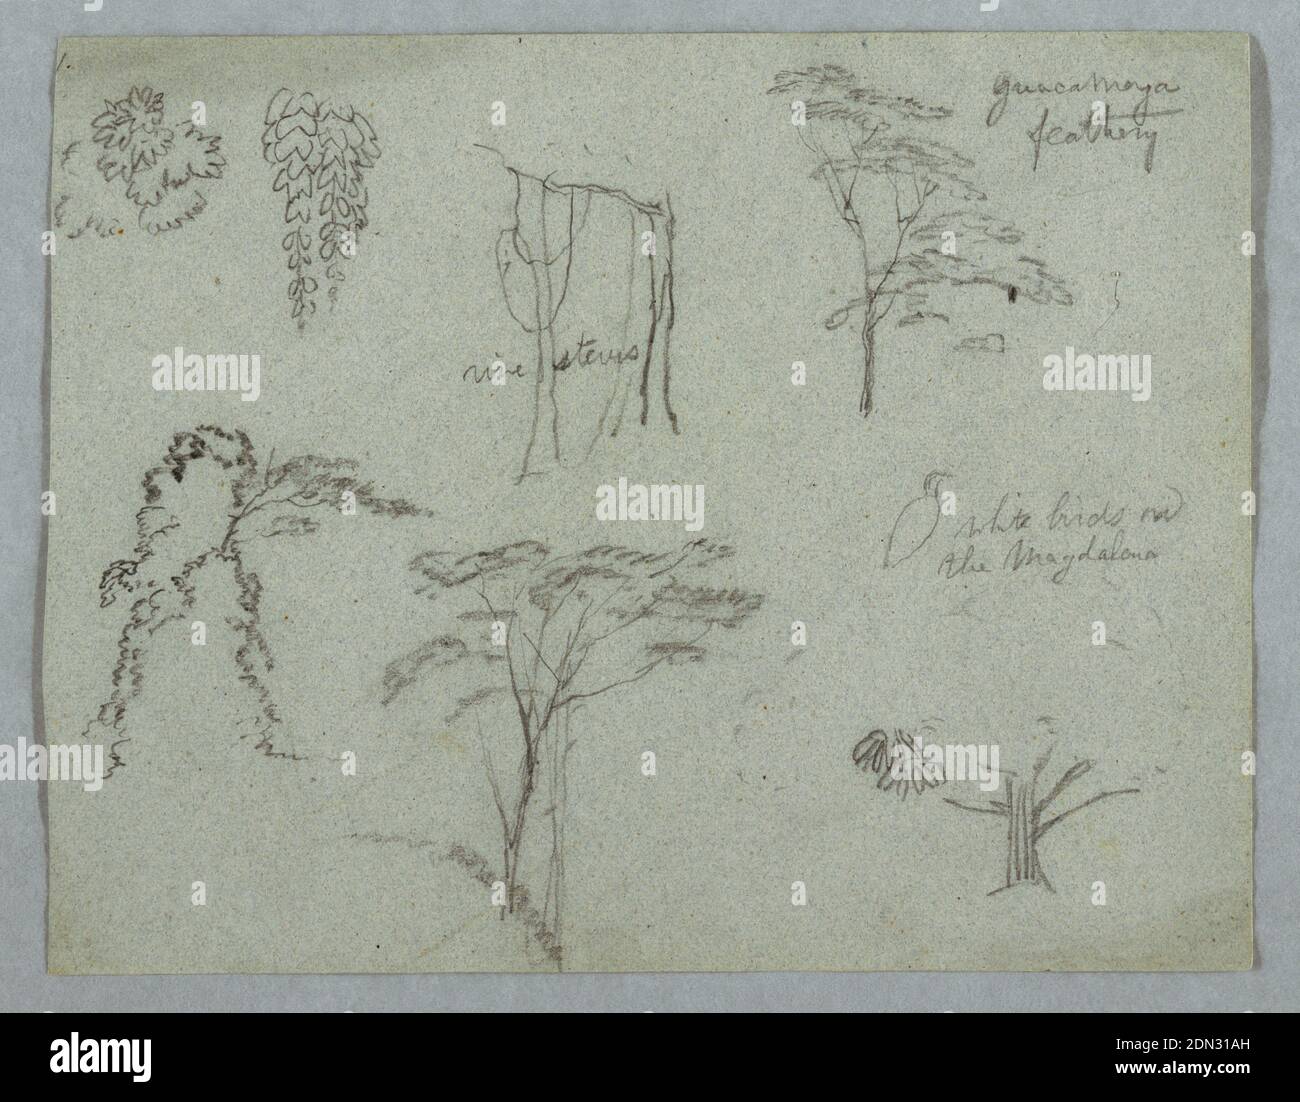 Sketches from the Rio Magdalena, Colombia: Leaf Boughs, Vine Stems, Guacamaya Tree Top, Bush and Tree Group, White Bird , and a Plant Detail, Frederic Edwin Church, American, 1826–1900, Graphite, brush and oxidized white on gray paper, Horizontal view of leaf boughs, vine stems and top of a Guacamaya tree across upper part of sheet with a group of bushes and trees, a white bird and a plant detain across the bottom part., 1853, probably May, nature studies, Drawing Stock Photo